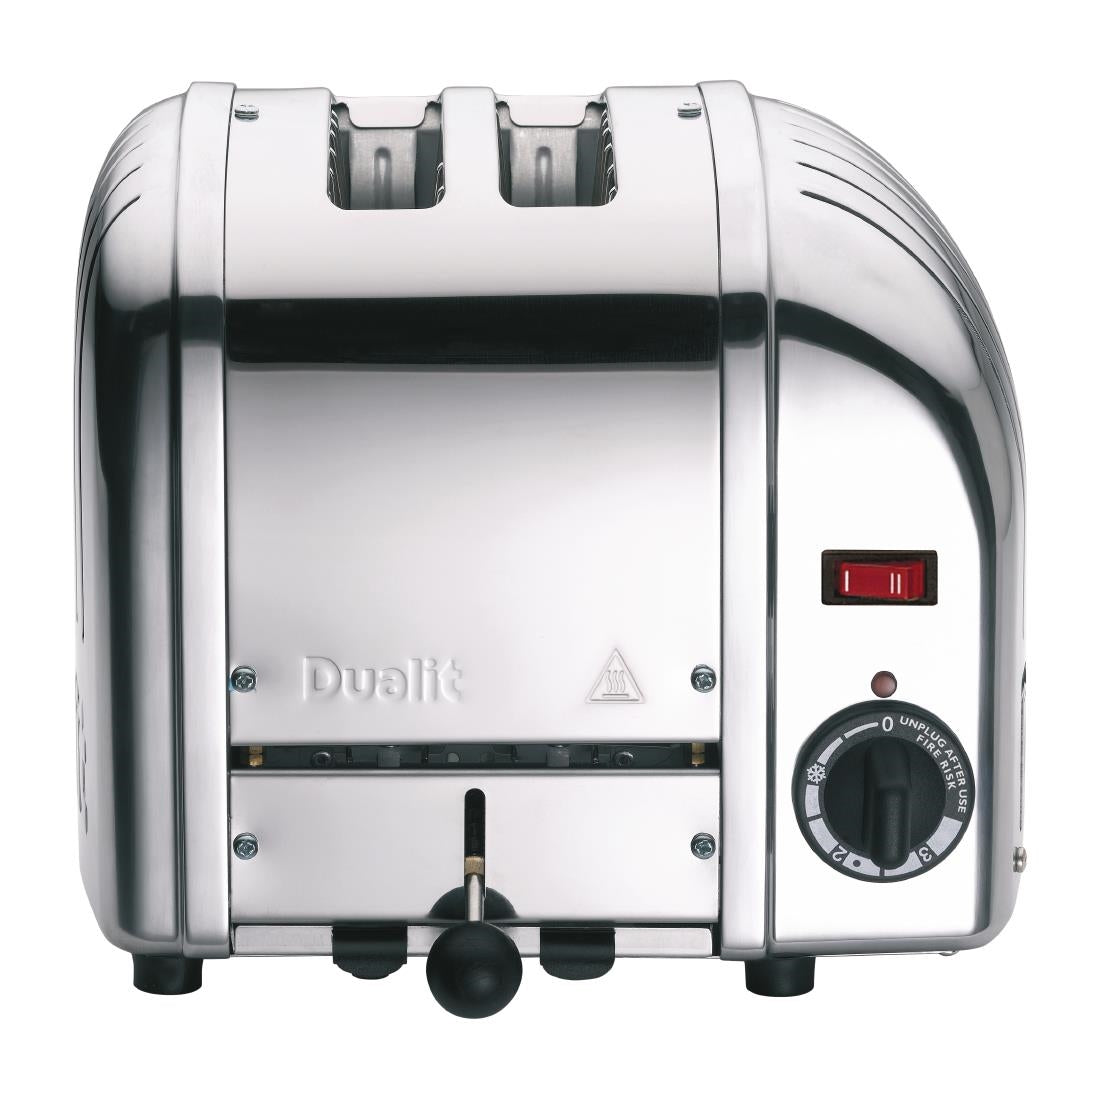 F208 Dualit 2 Slice Vario Toaster Stainless Steel 20245 JD Catering Equipment Solutions Ltd